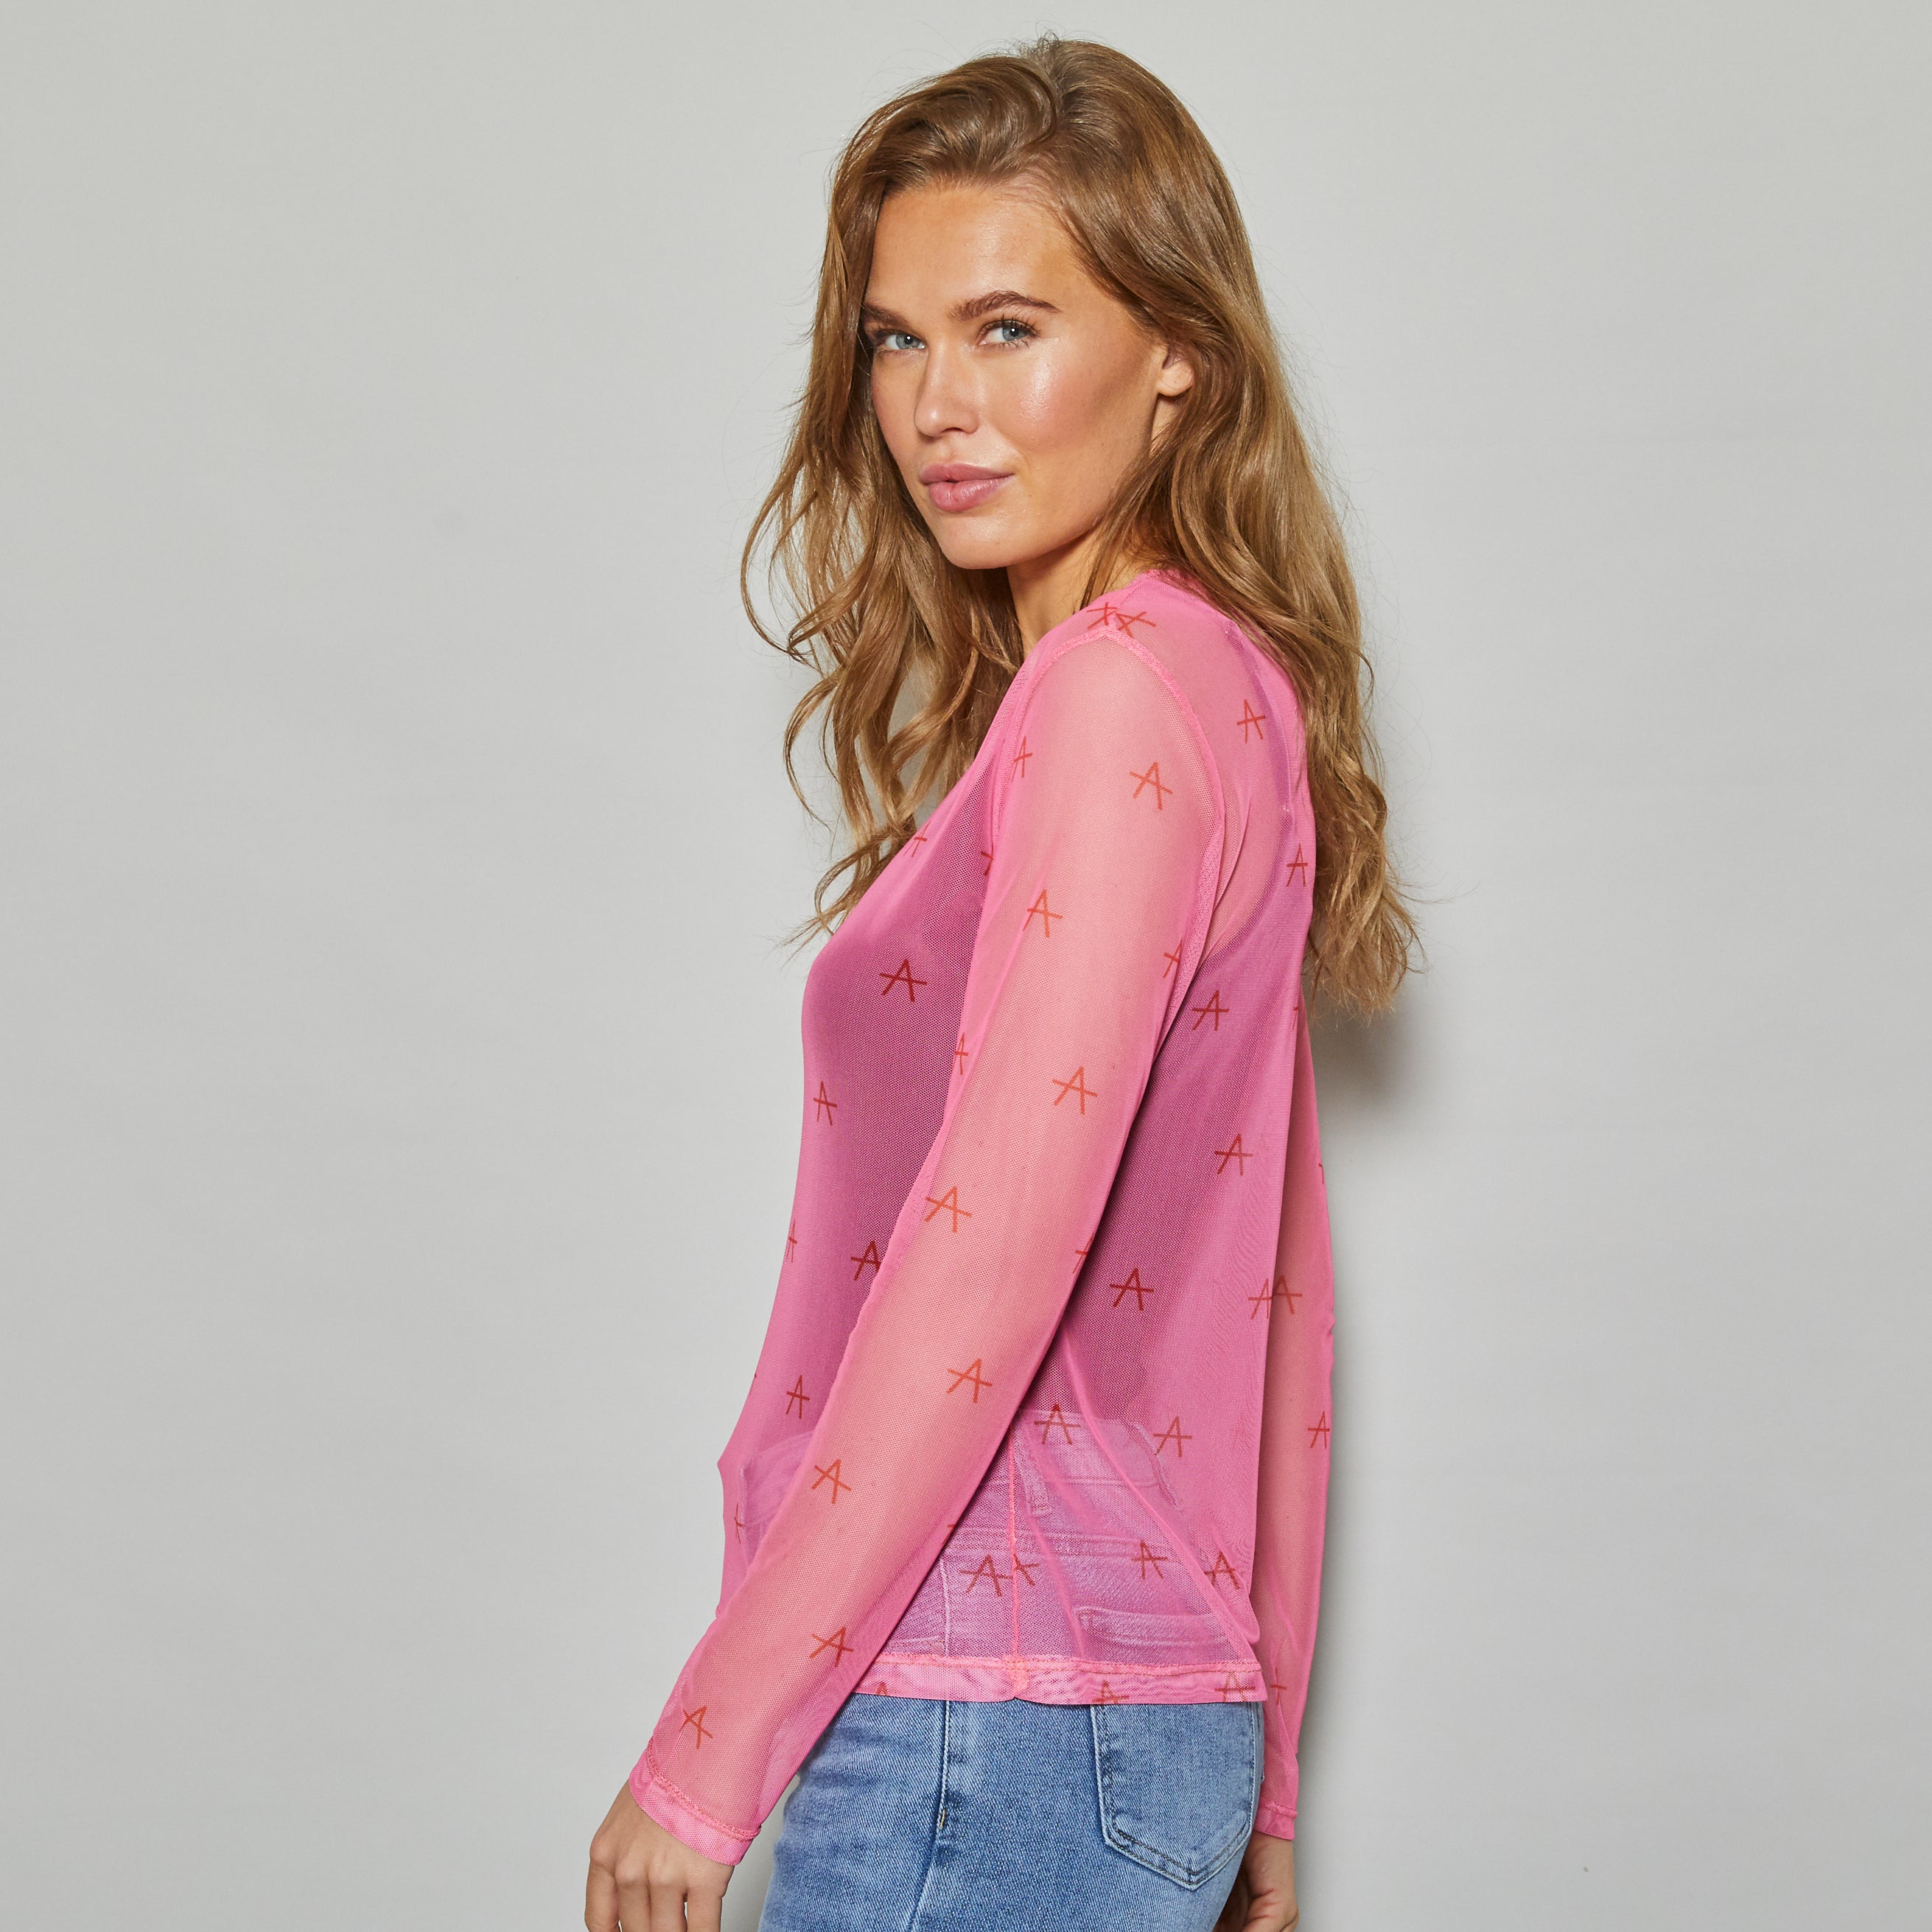 ALLWEEK Fro mesh blouse Blouse Pink with red A print